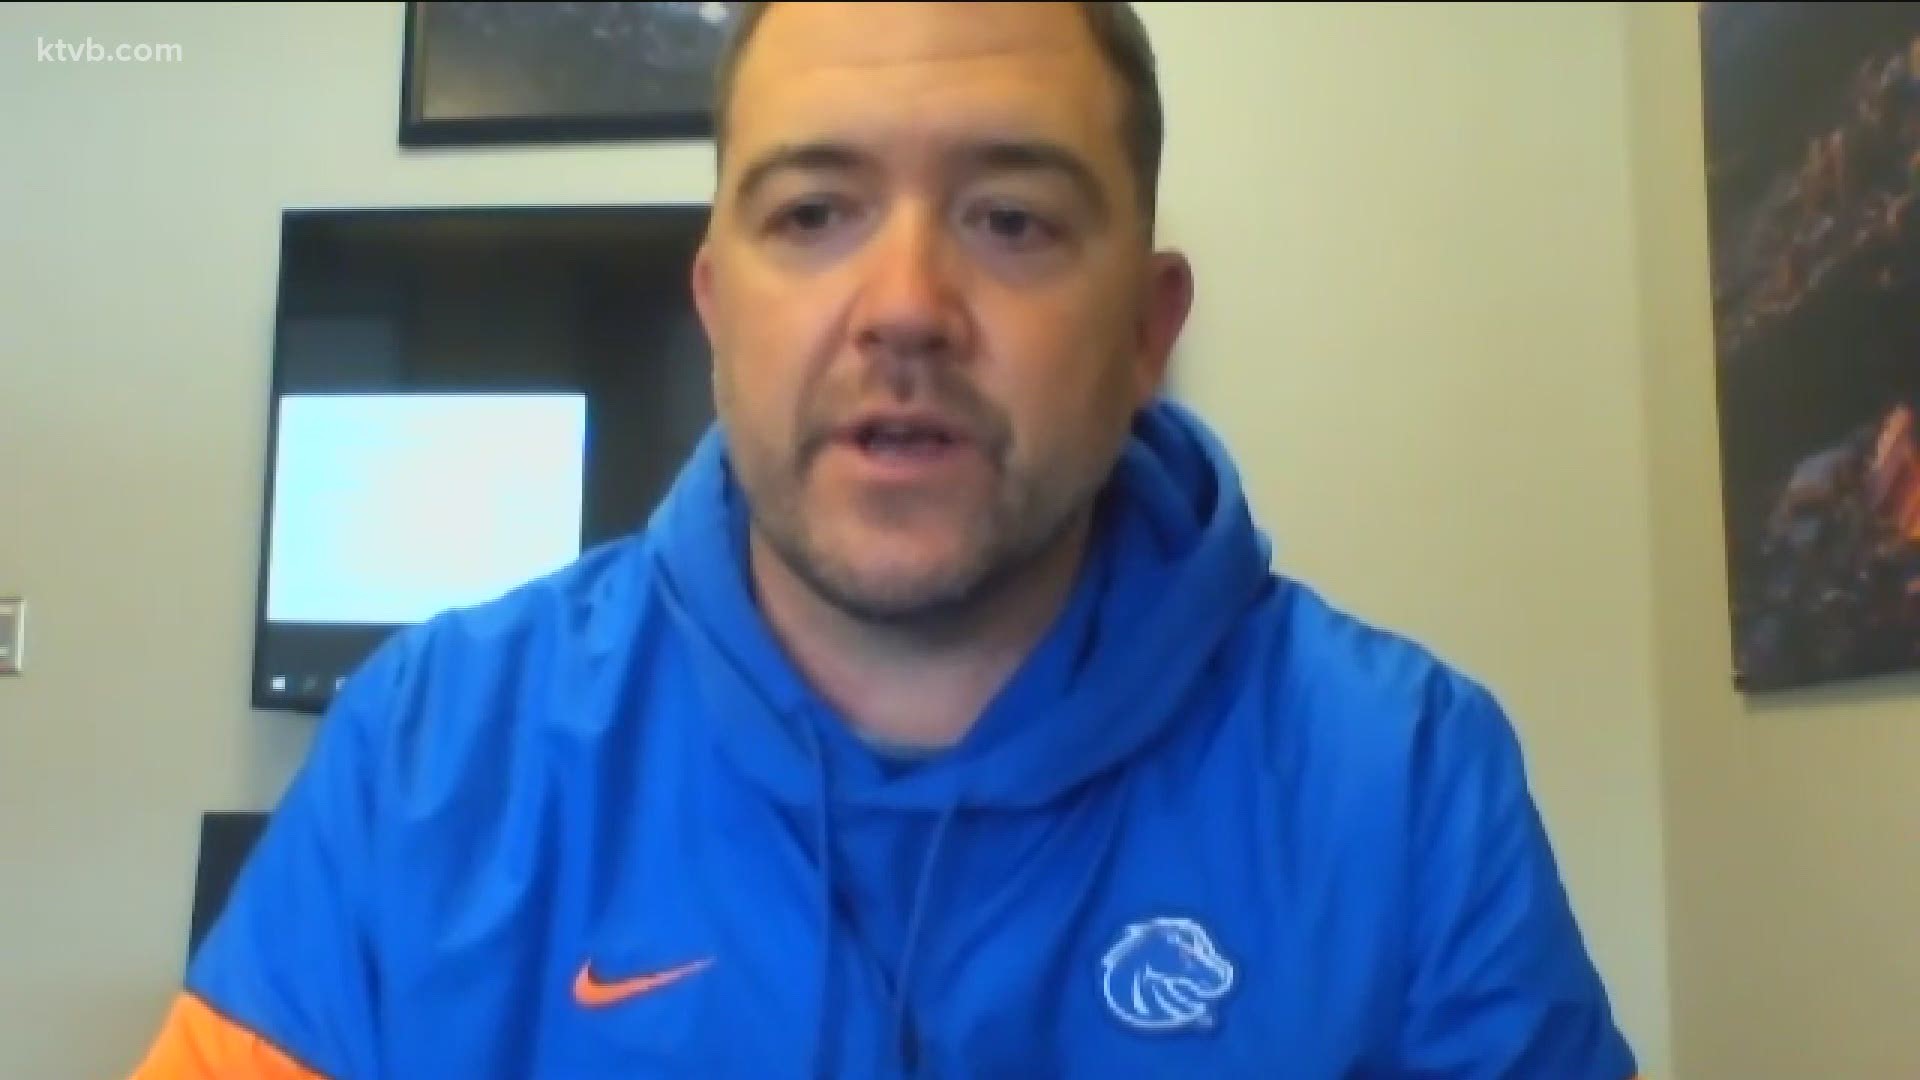 Boise State defensive coordinator Jeff Schmedding describes what the Broncos need to do to get over the loss against BYU.